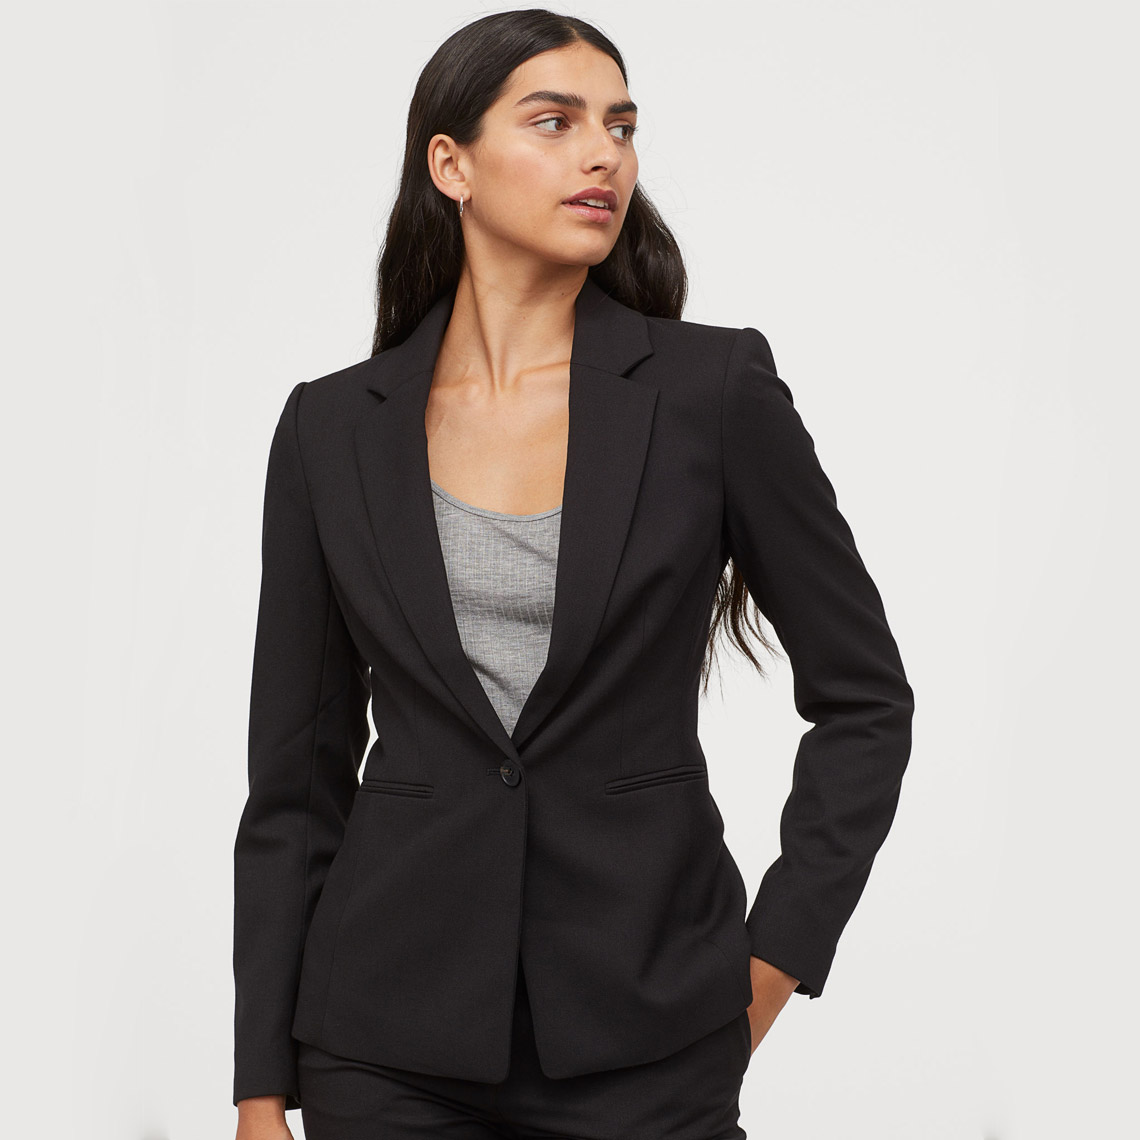 Solid Lapel Collar Women Business Blazers Apparel Double Breasted